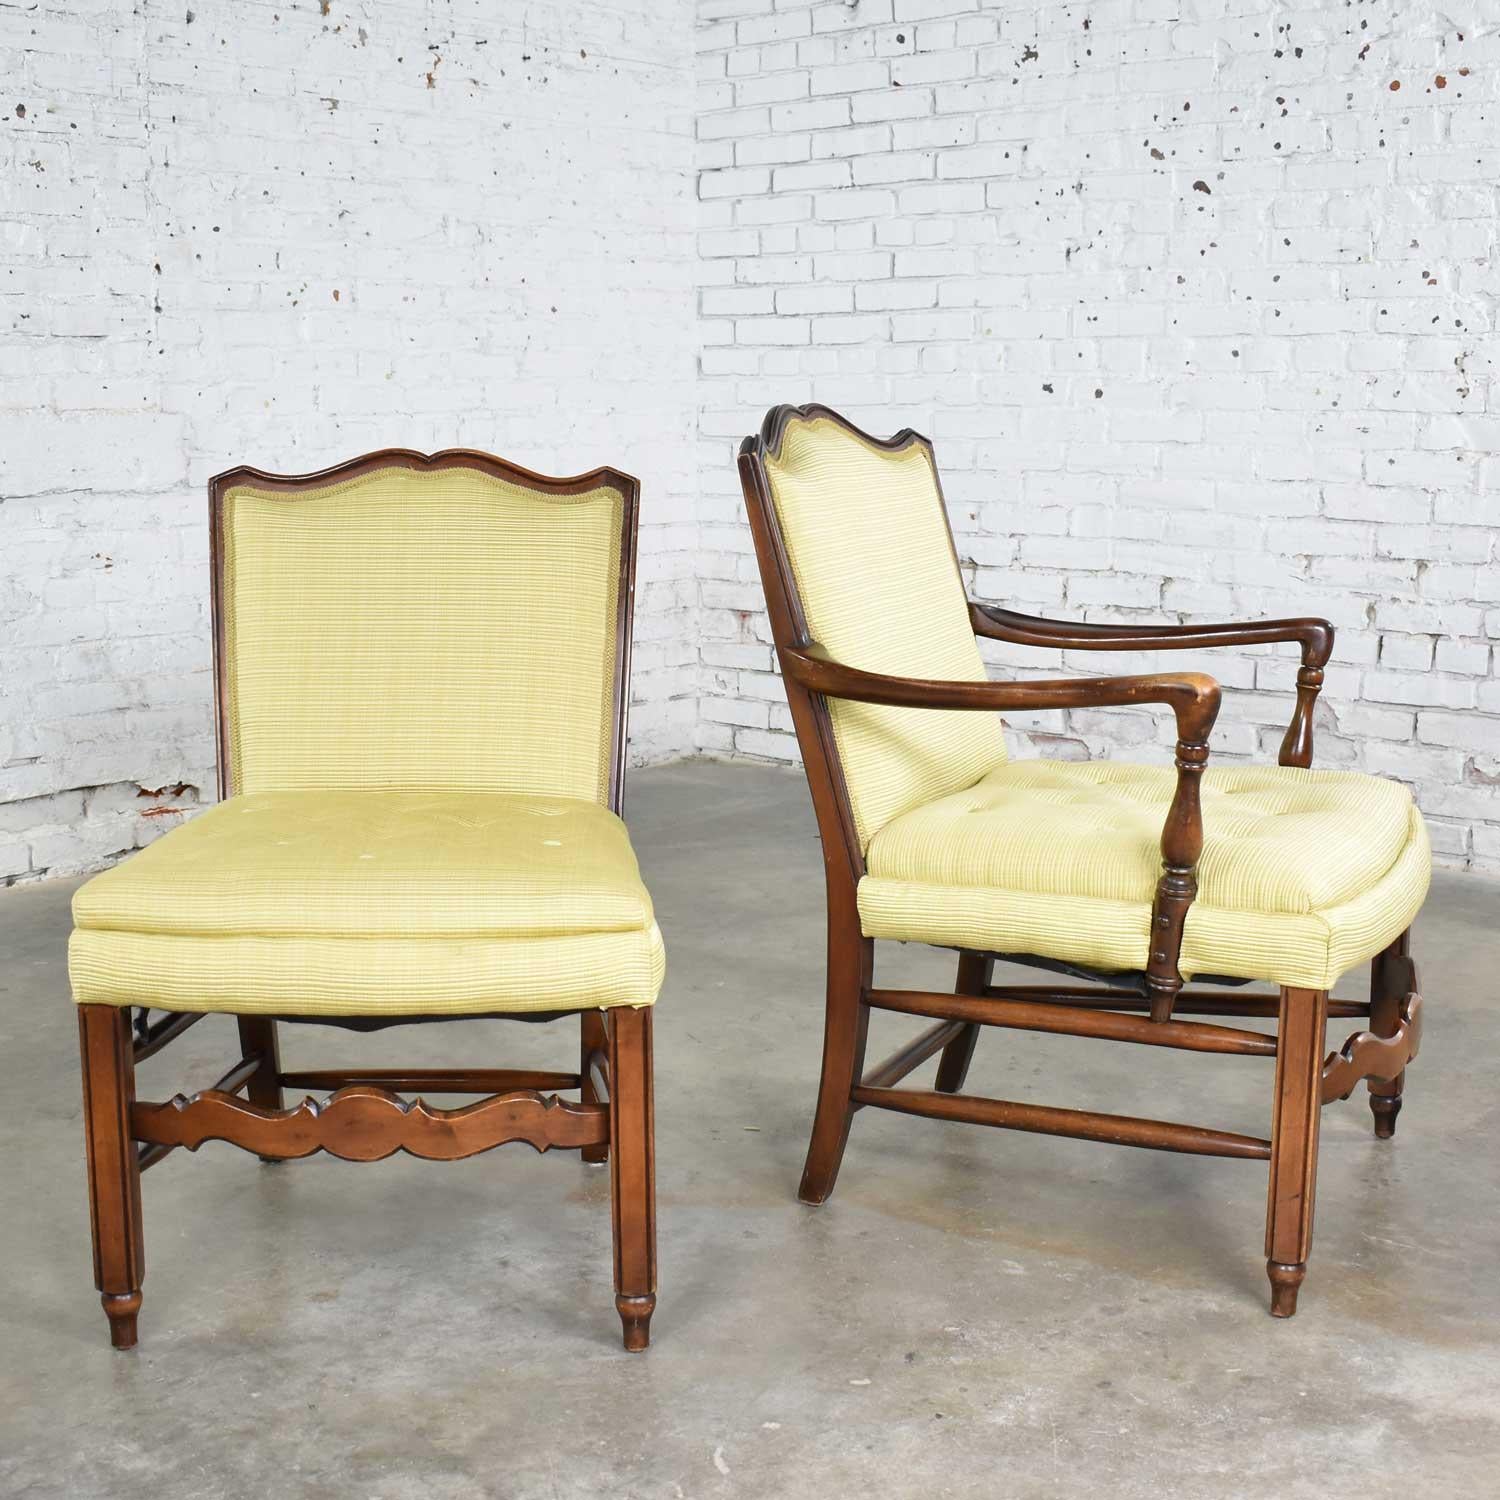 Pair of Georgian Revival His and Hers Accent Chairs in Golden Yellow 6